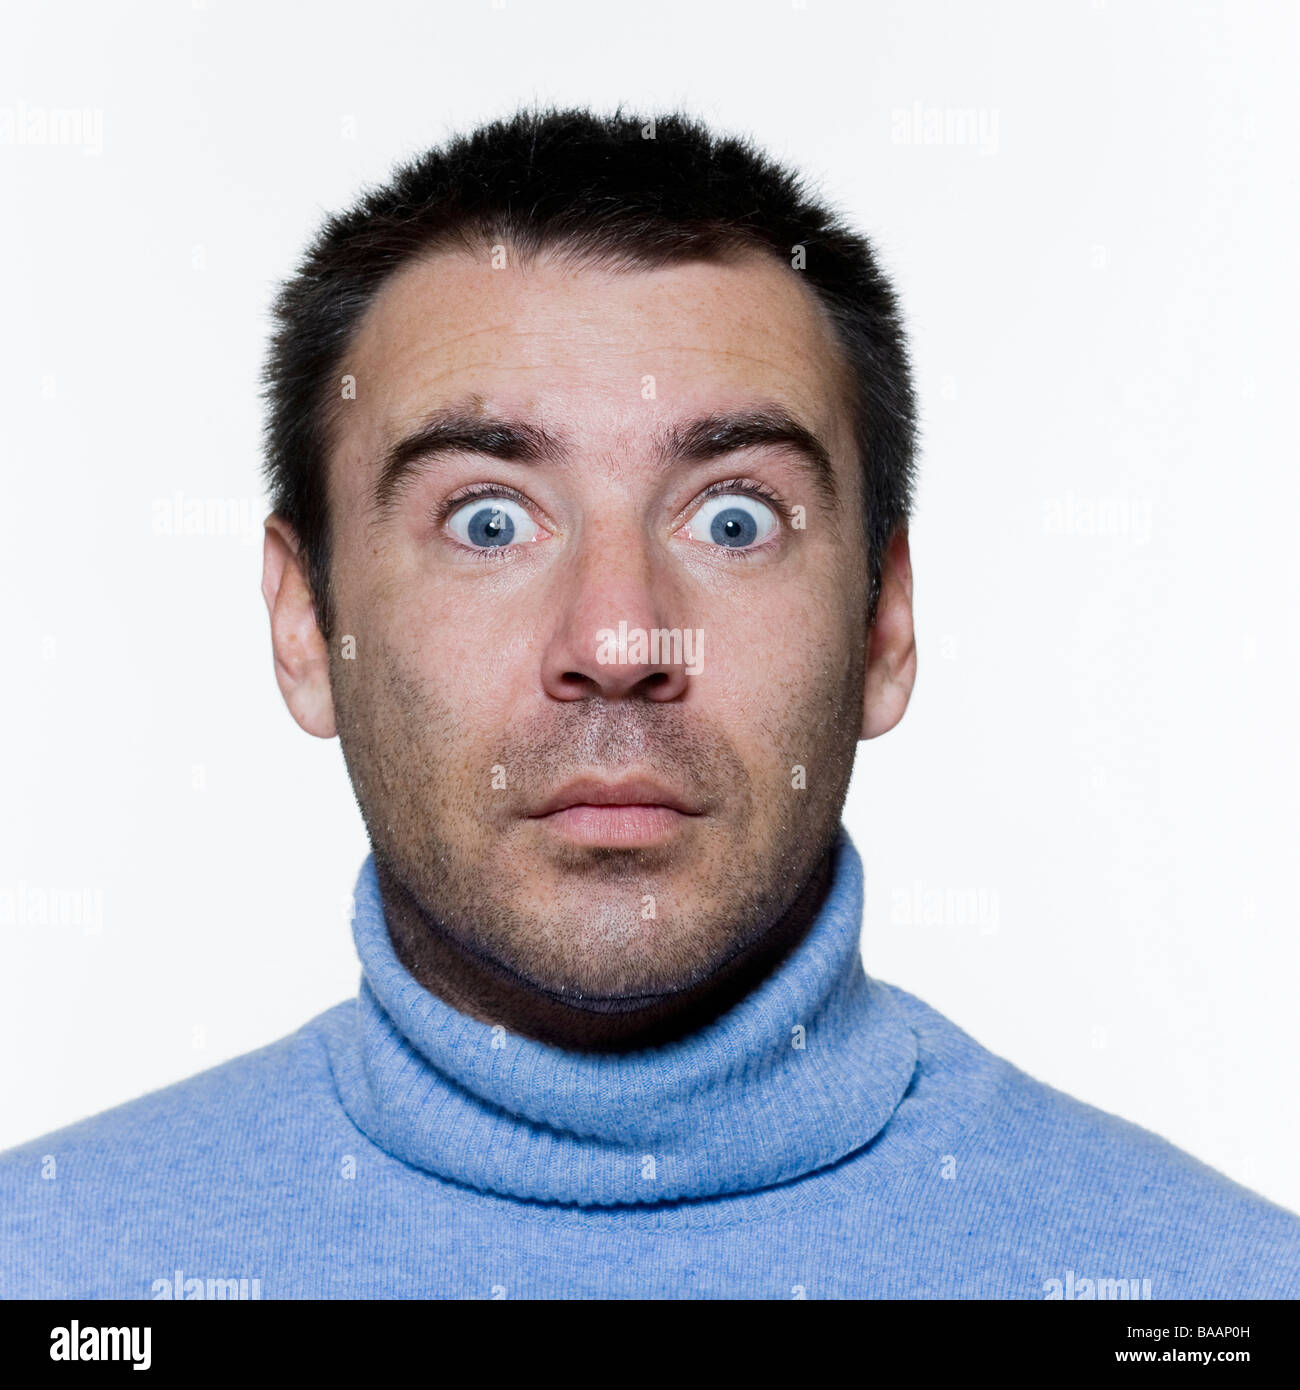 expressive portrait on isolated background of a handsome man Stock Photo